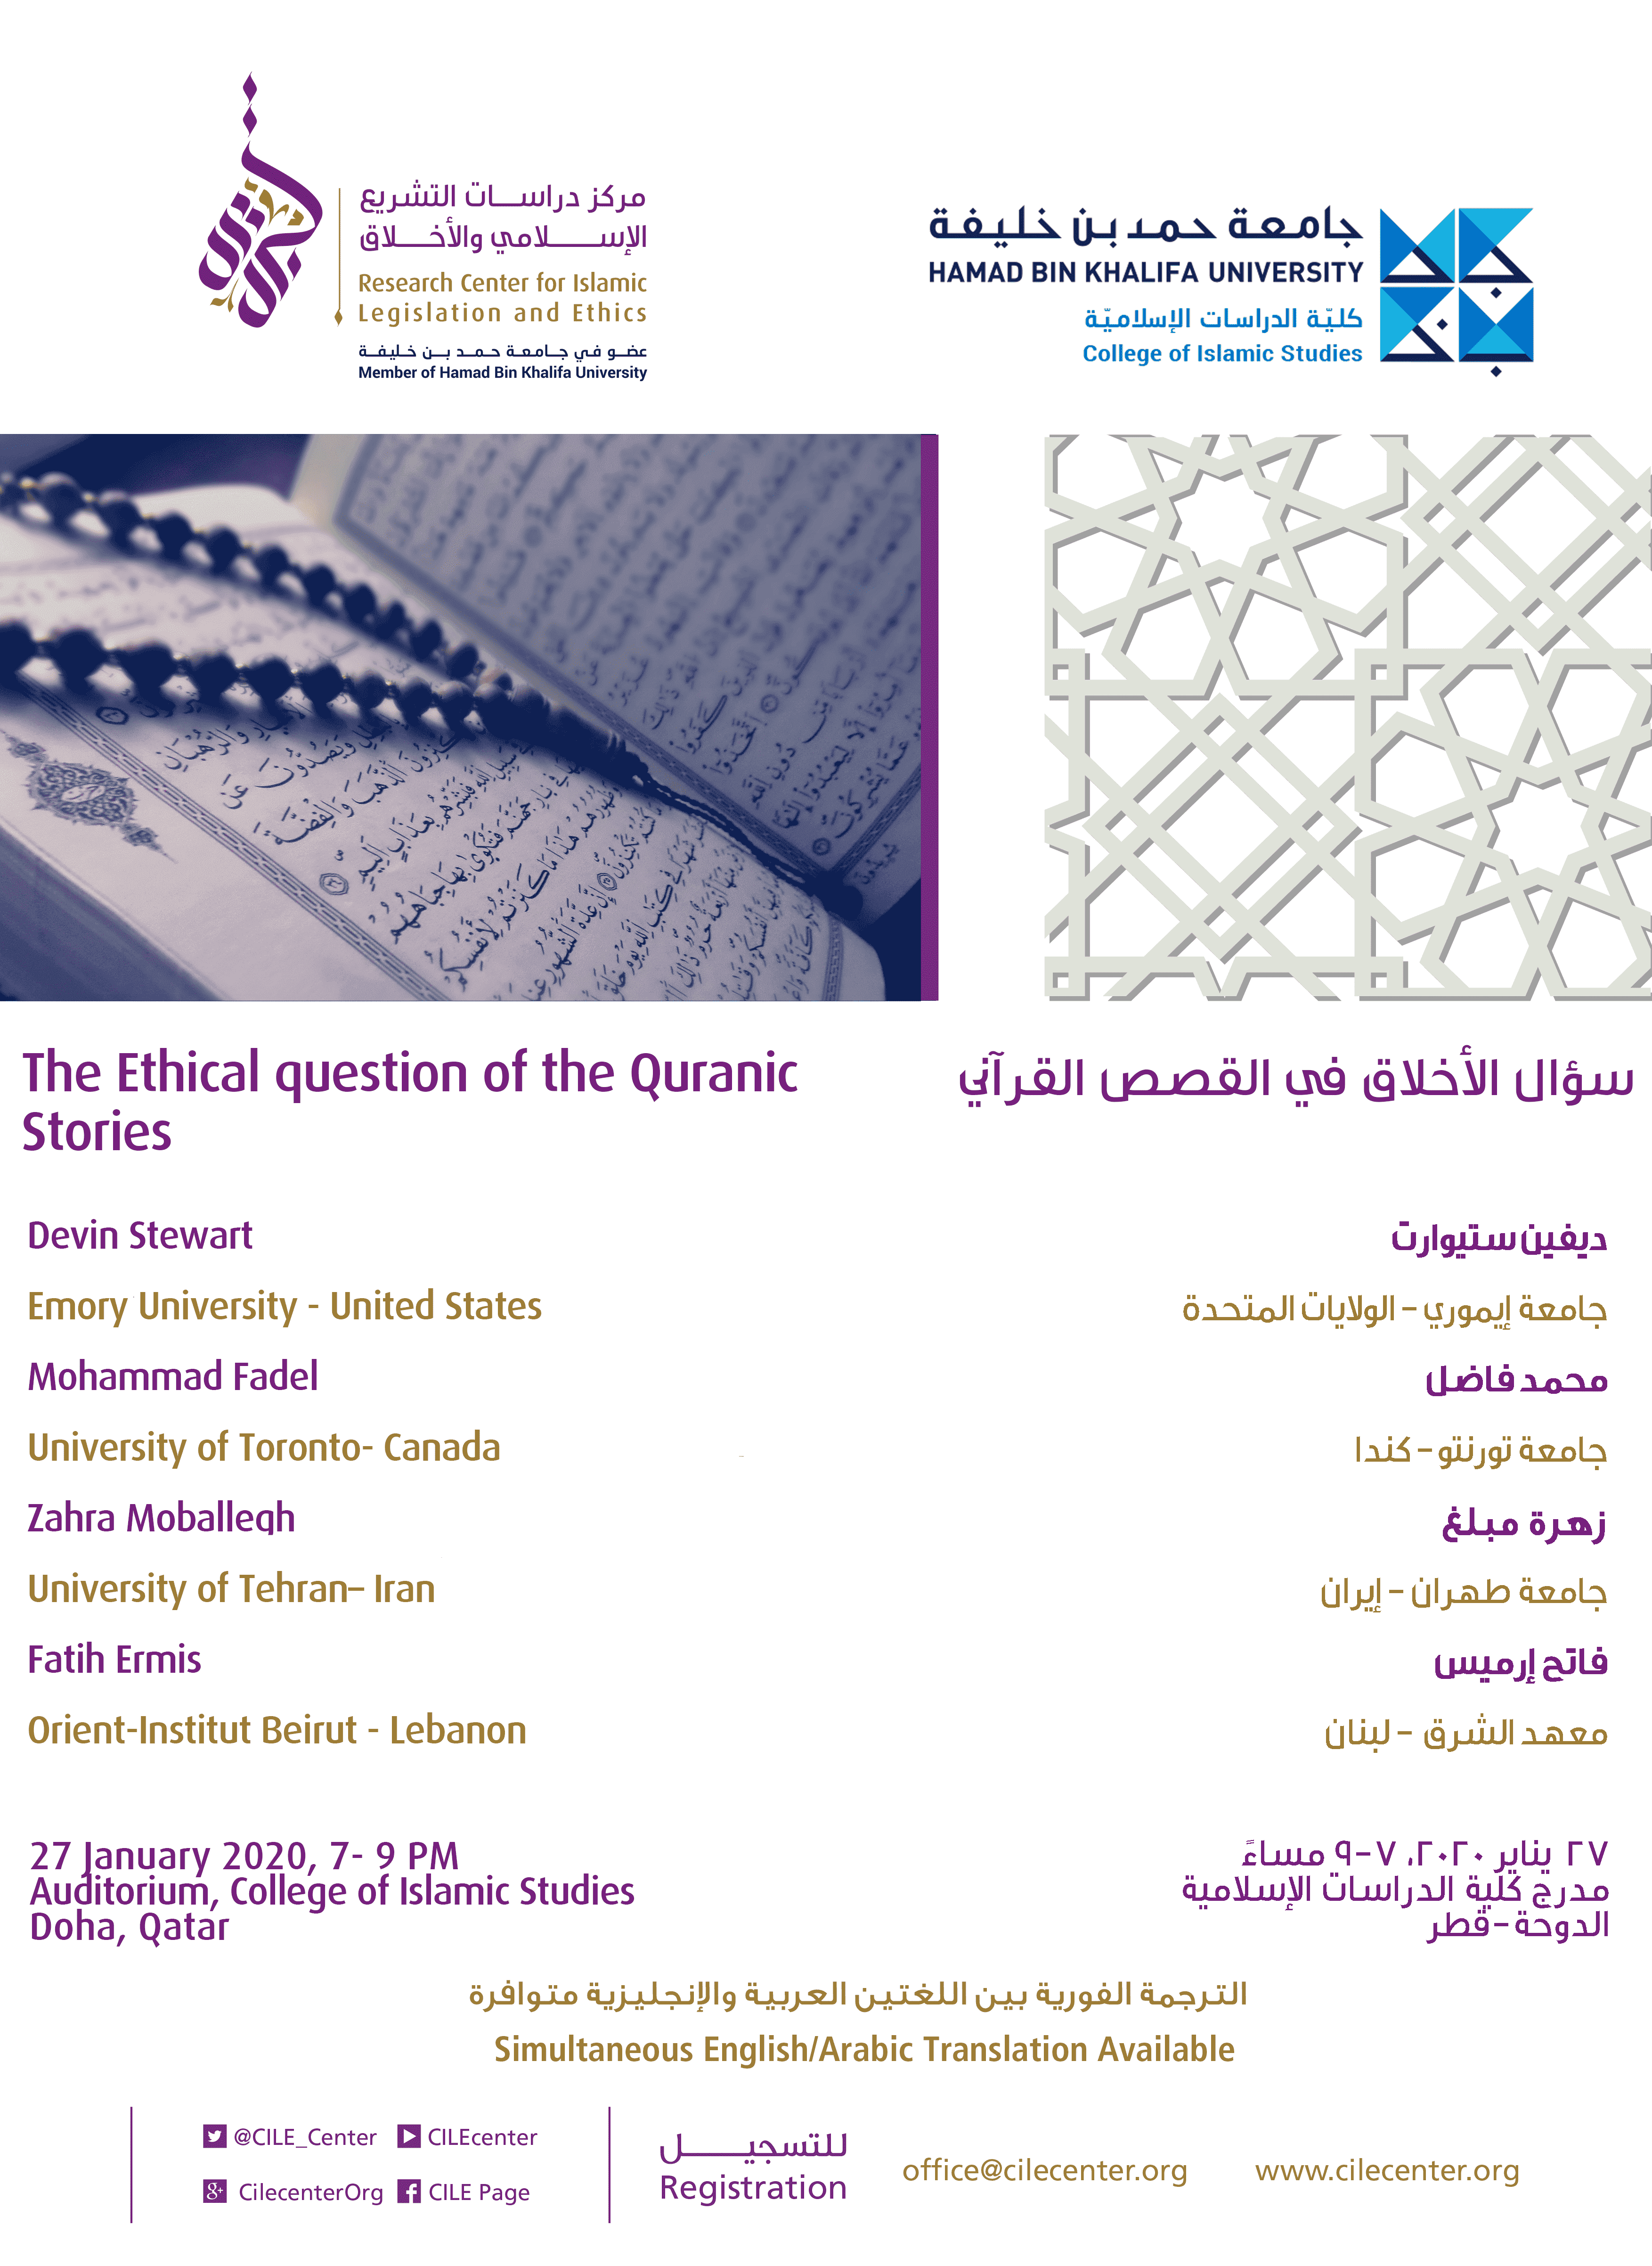 Lecture: The Ethical Question of the Quranic Stories